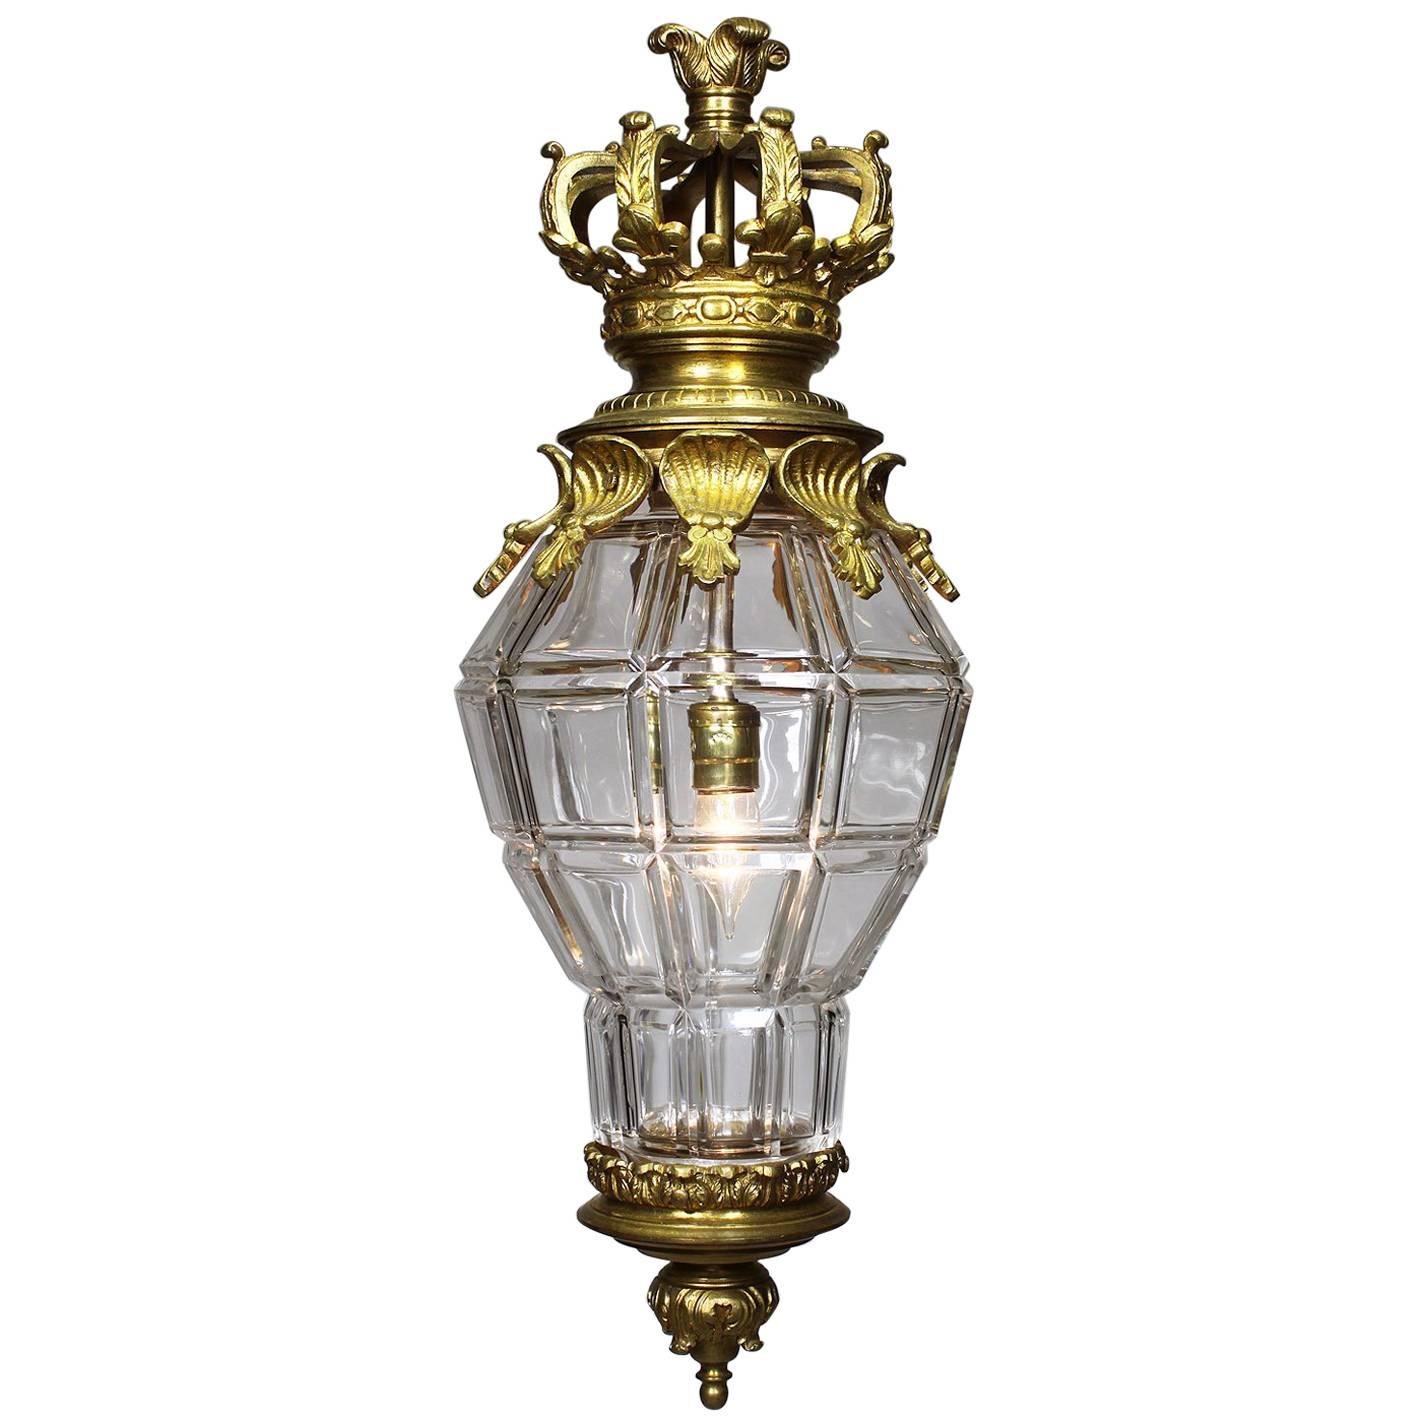 French 19th-20th Century Gilt-Bronze and Molded Glass "Versailles" Style Lantern